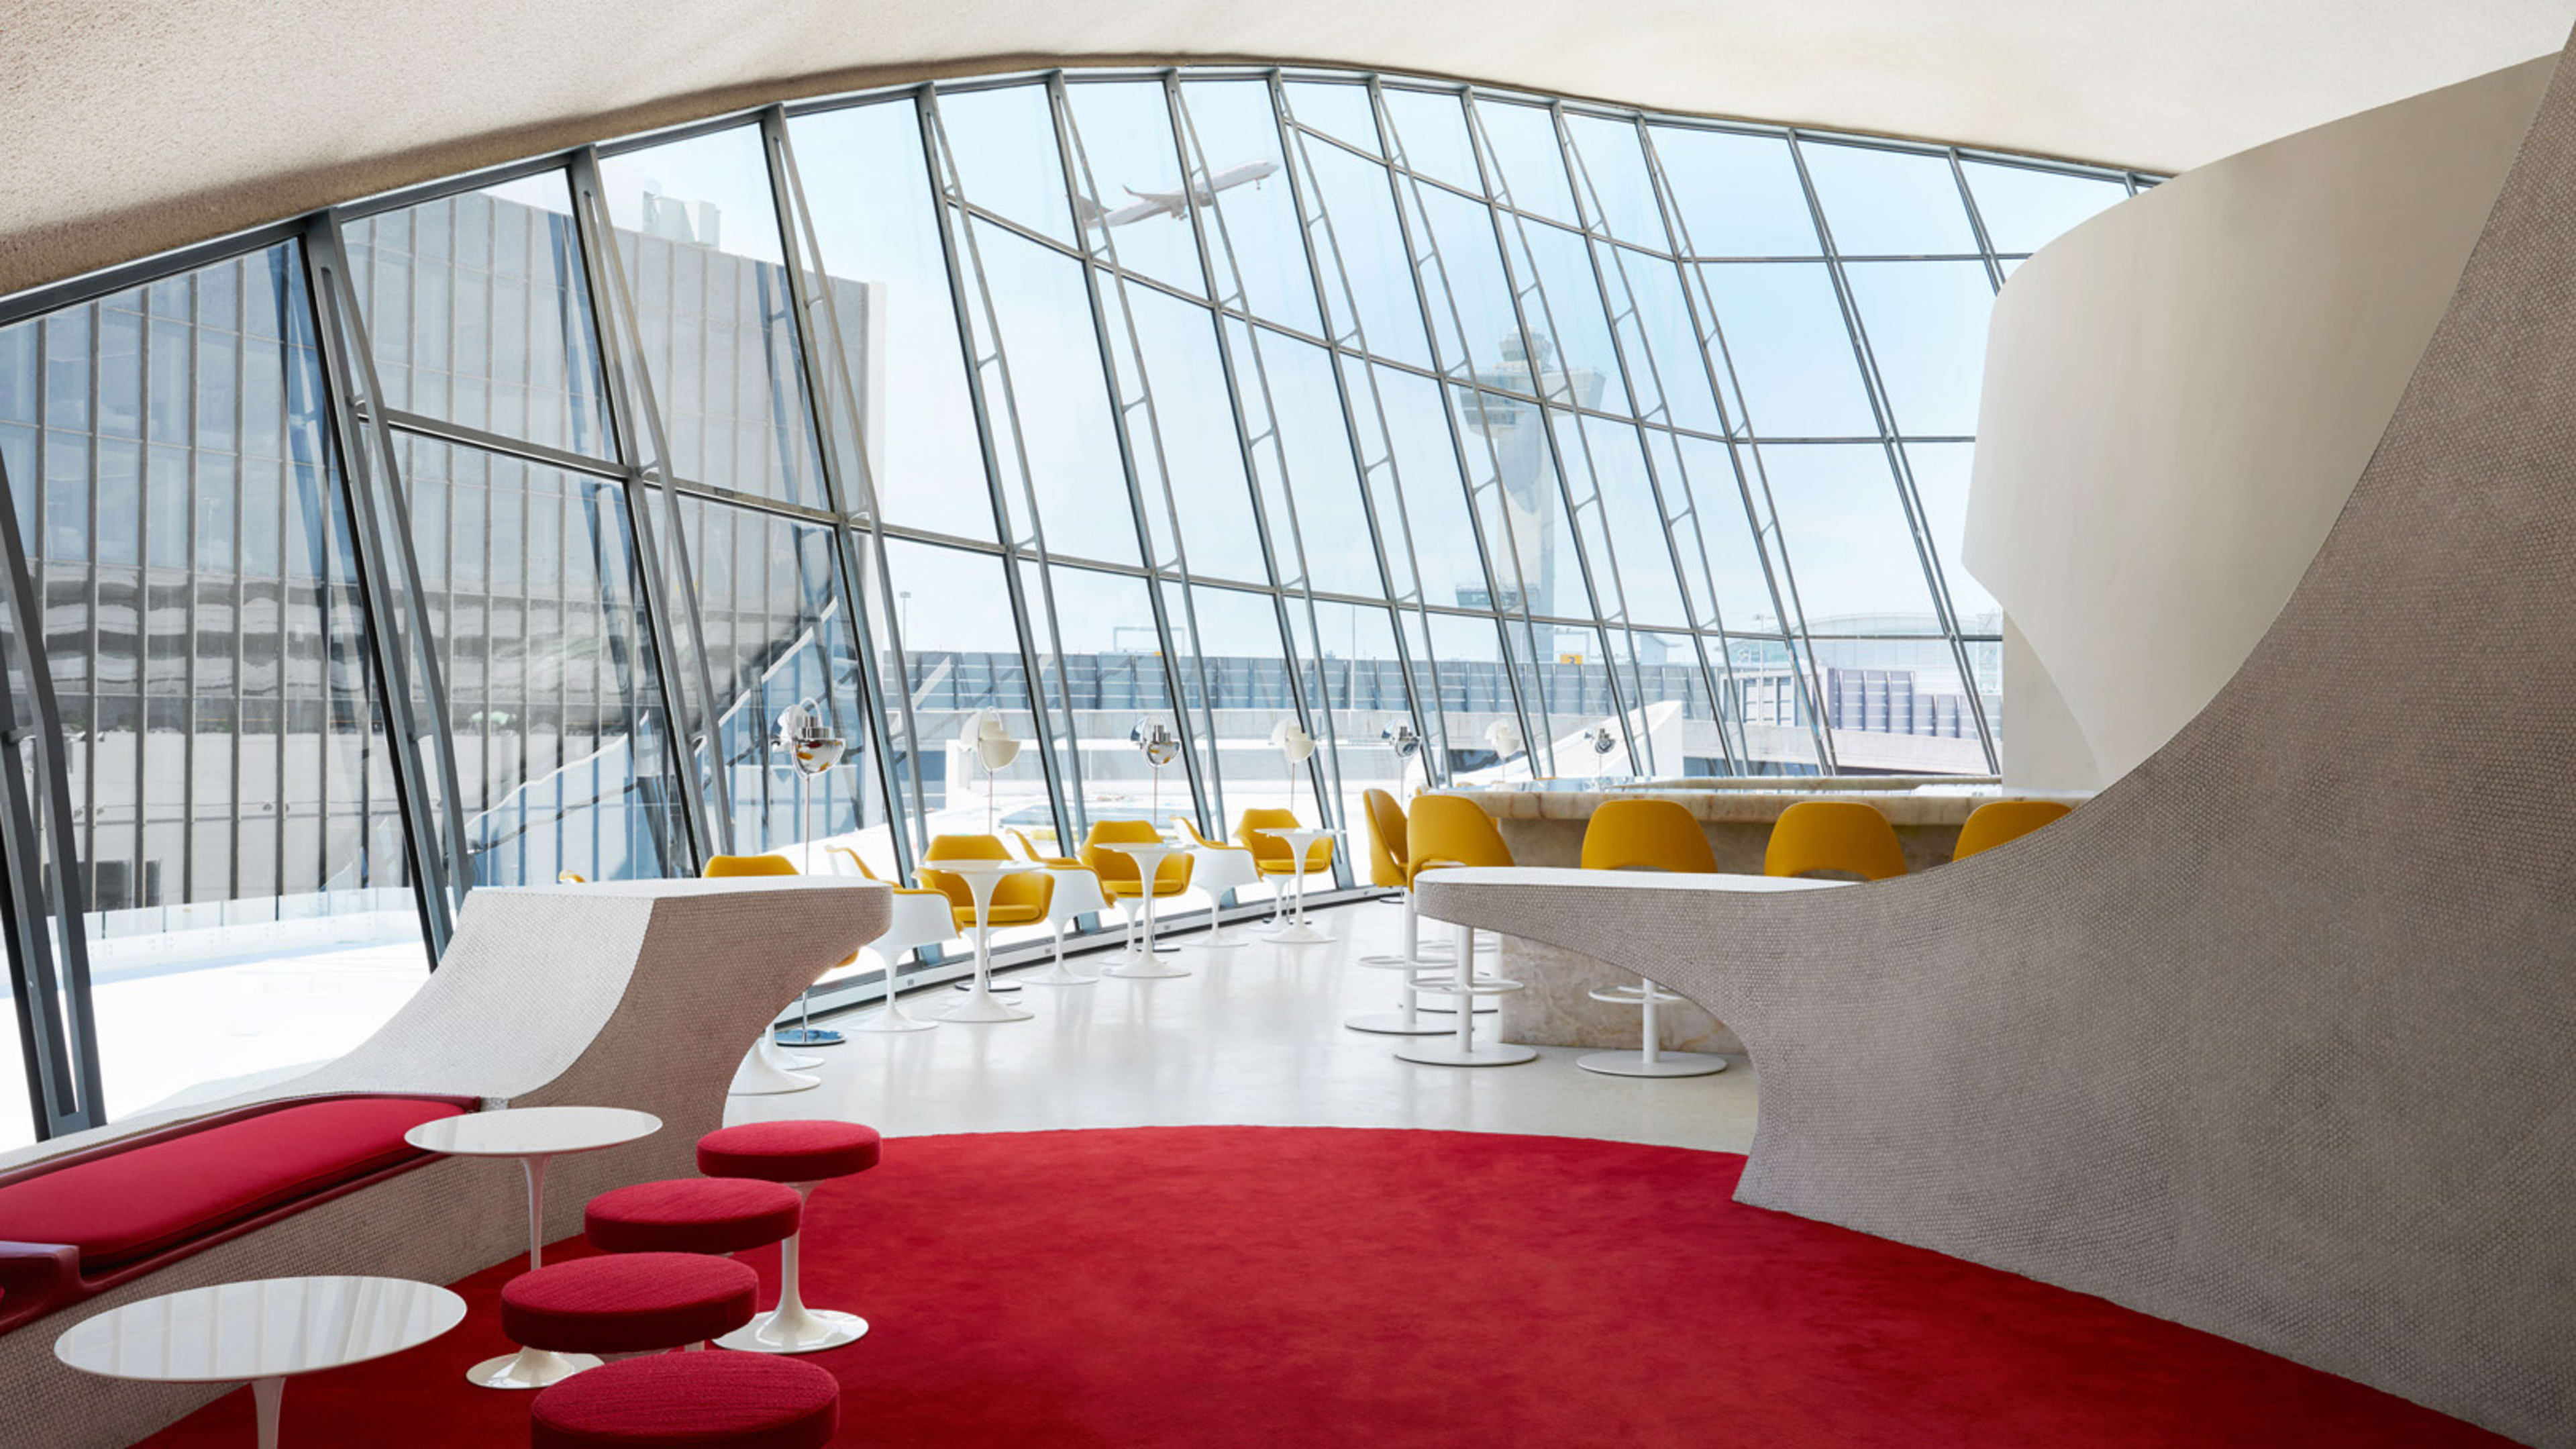 The TWA hotel at JFK is open, and it looks amazing